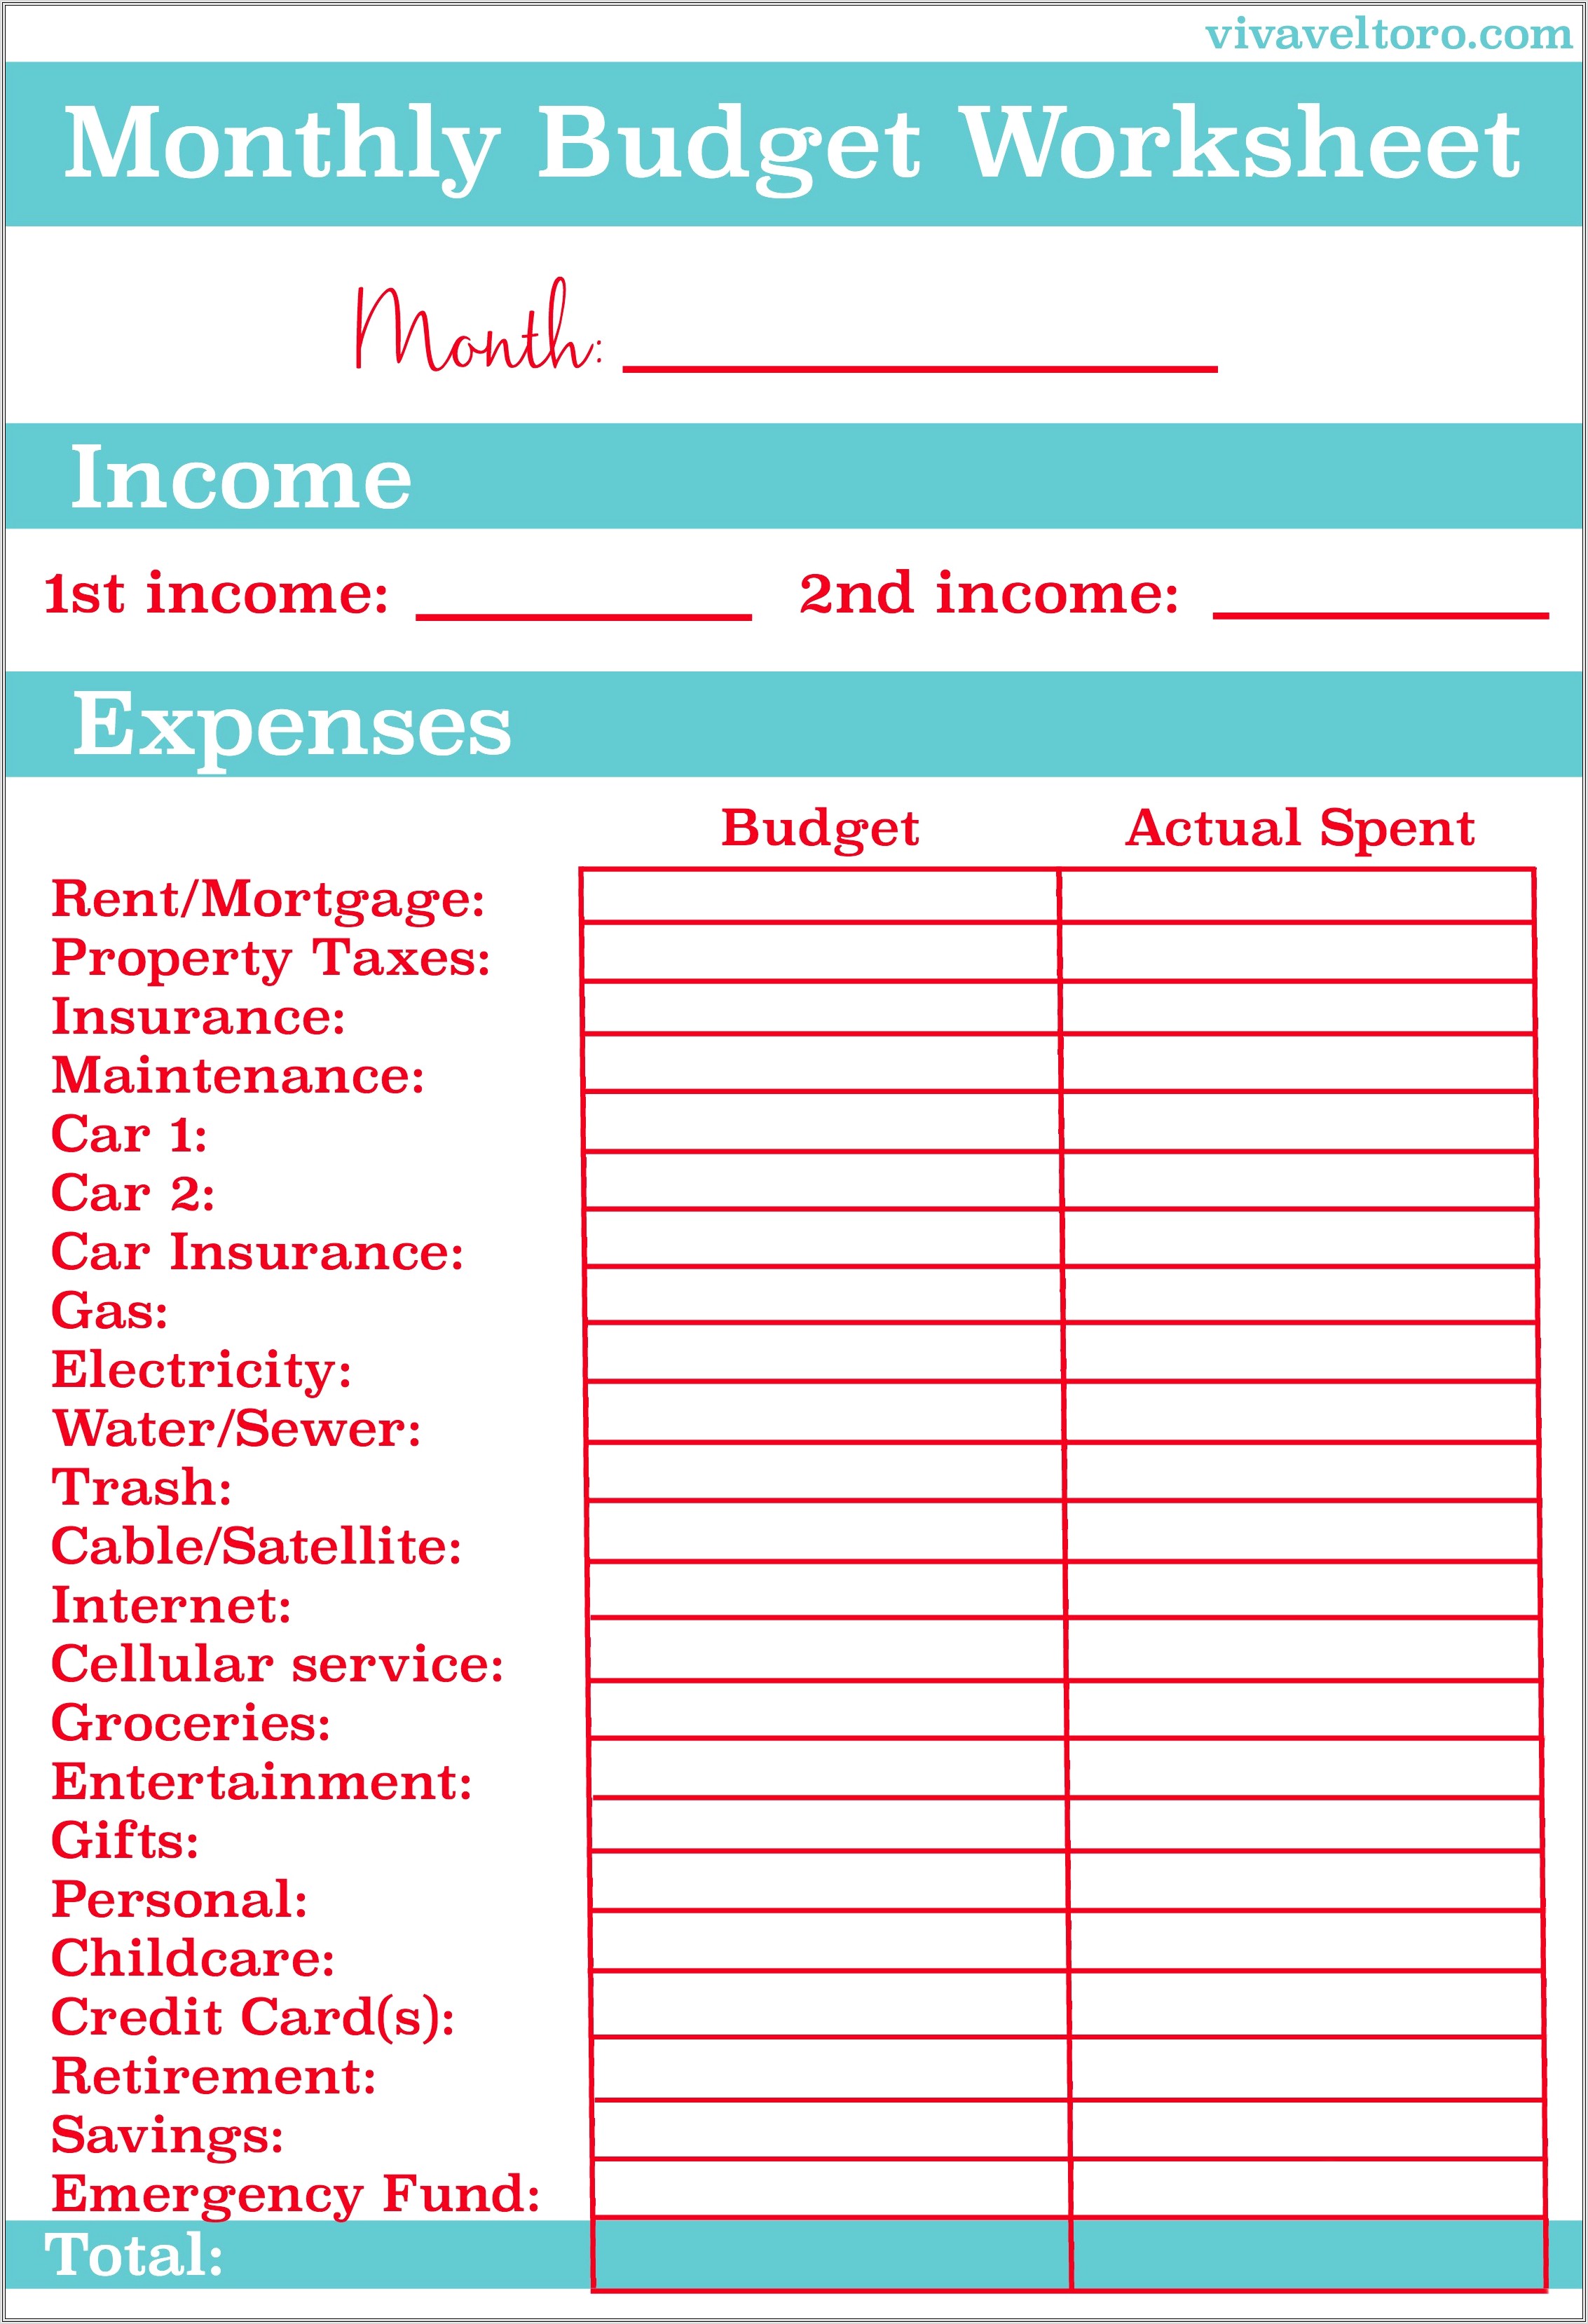 How To Budget Worksheet